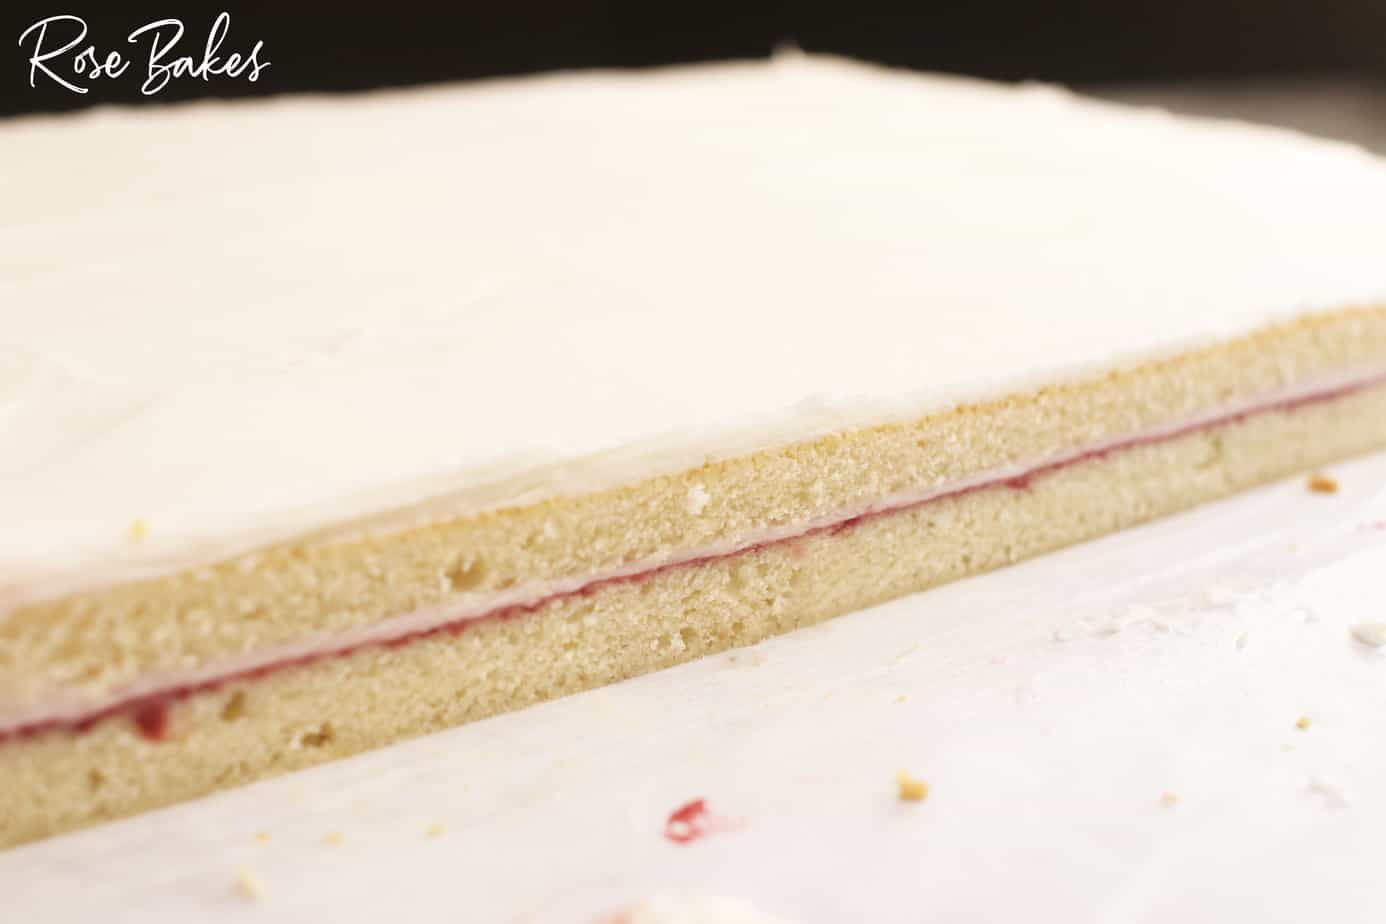 Smooth cut edge of cake showing the filling in the middle.